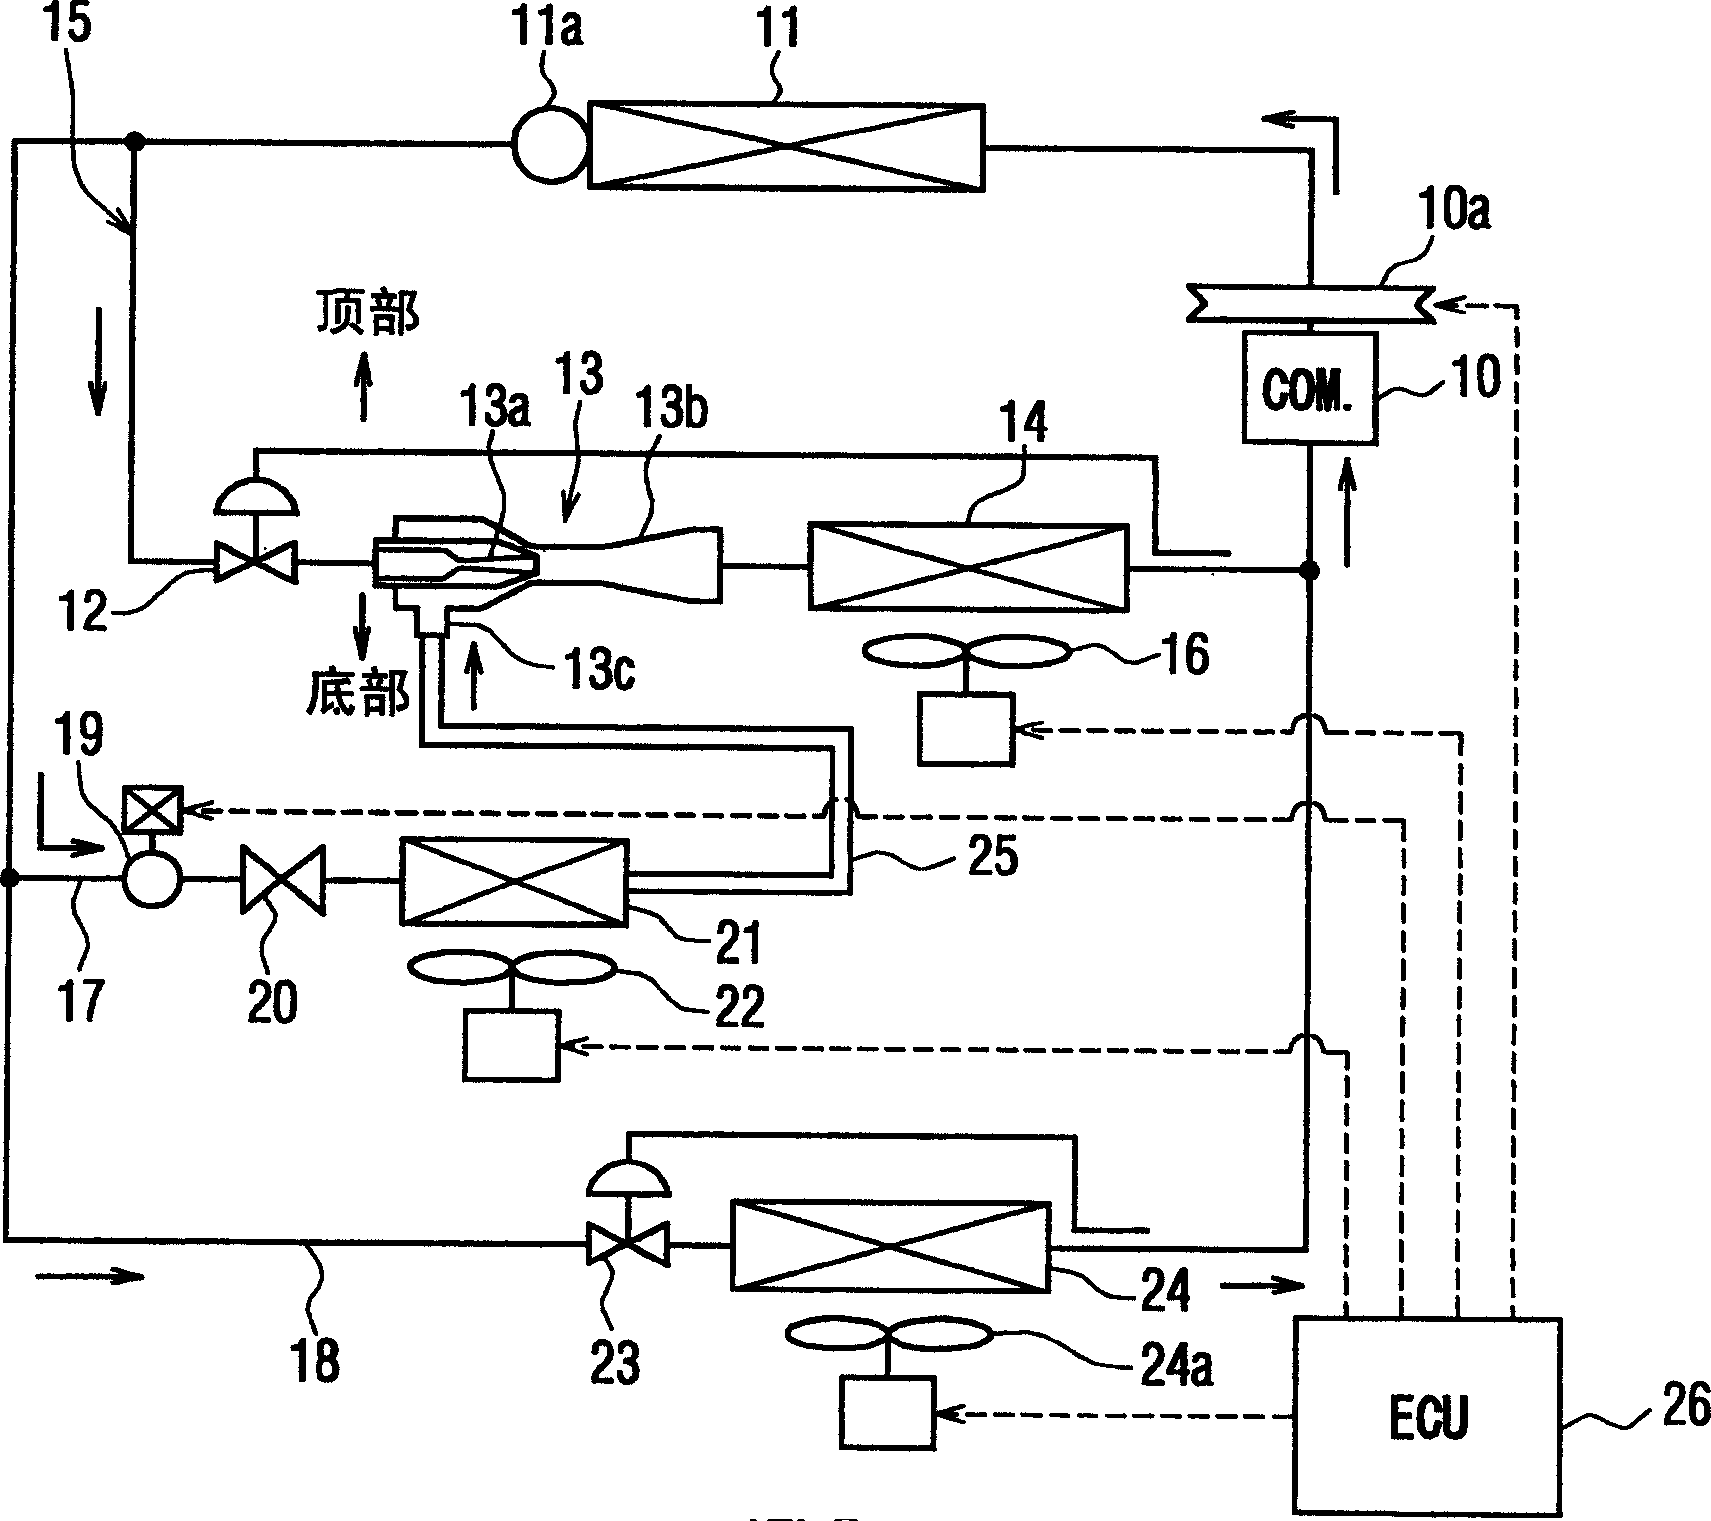 Vapor-compression refrigerant cycle system with ejector